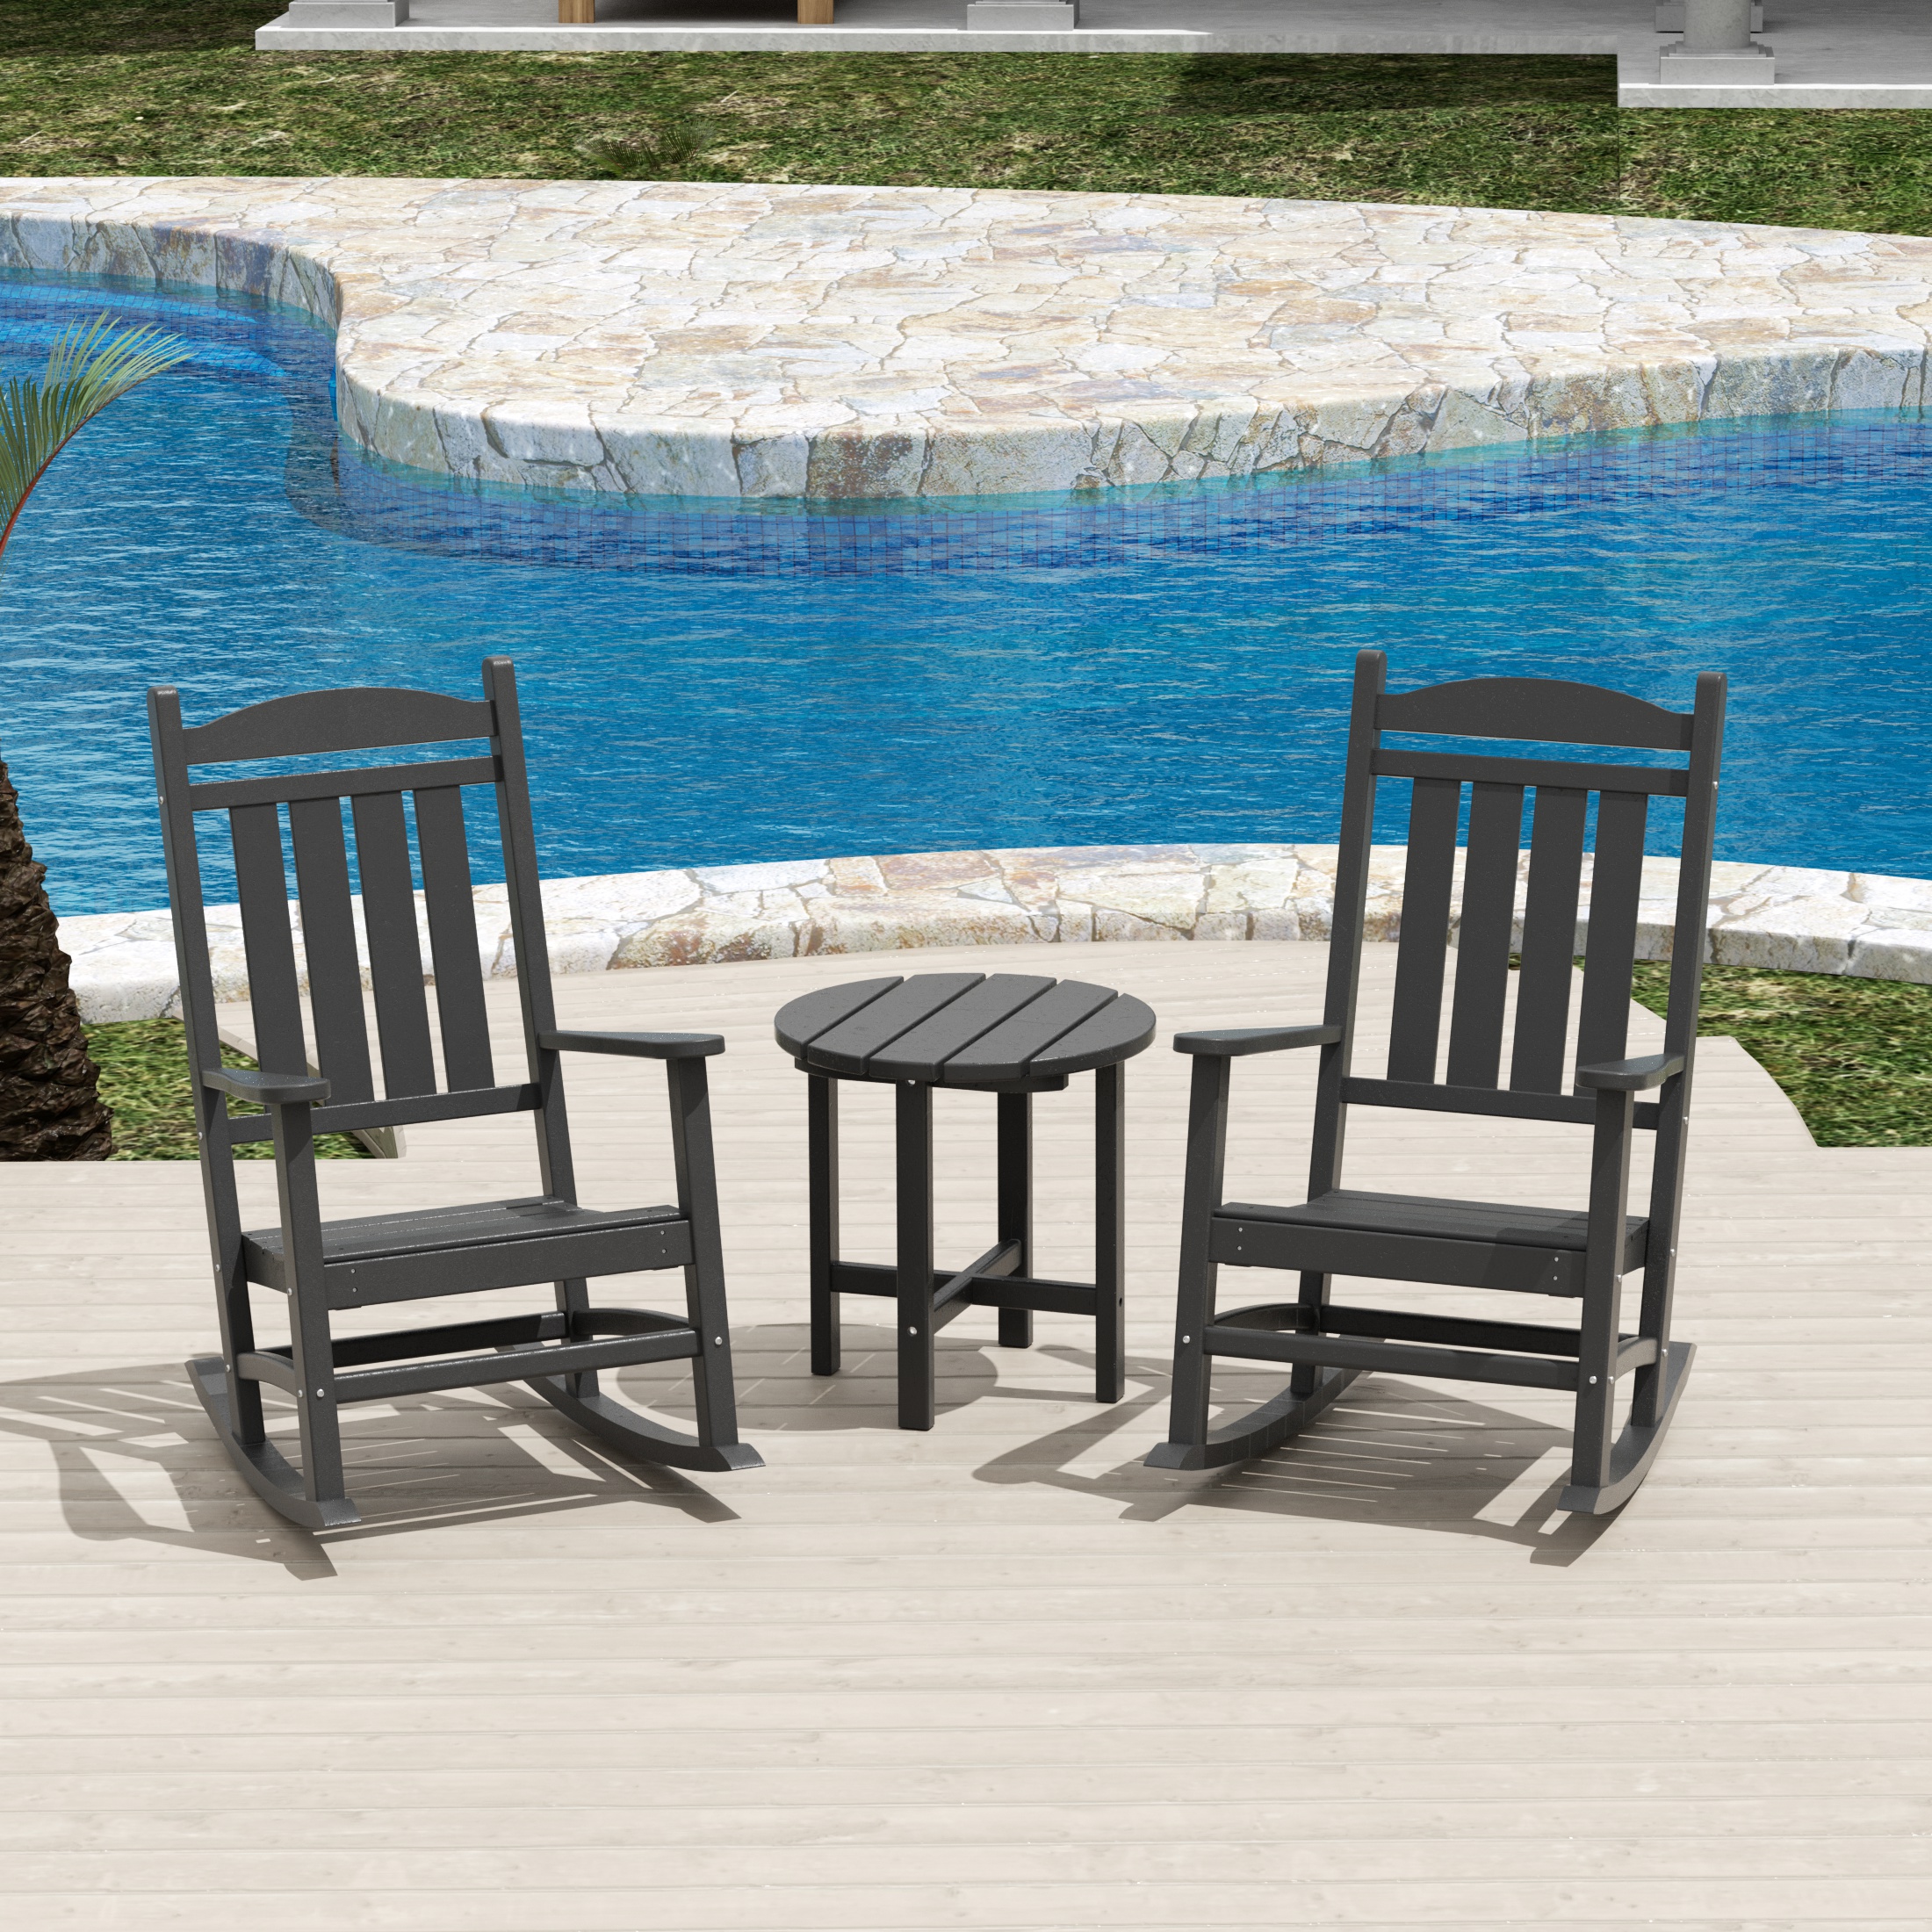 WestinTrends Malibu Classic 3 Piece Outdoor Rocking Chairs Set, All Weather Poly Lumber Adirondack Rocker Bistro Set Patio Deck Porch Chairs Set of 2 with Side Table, Gray - image 2 of 7